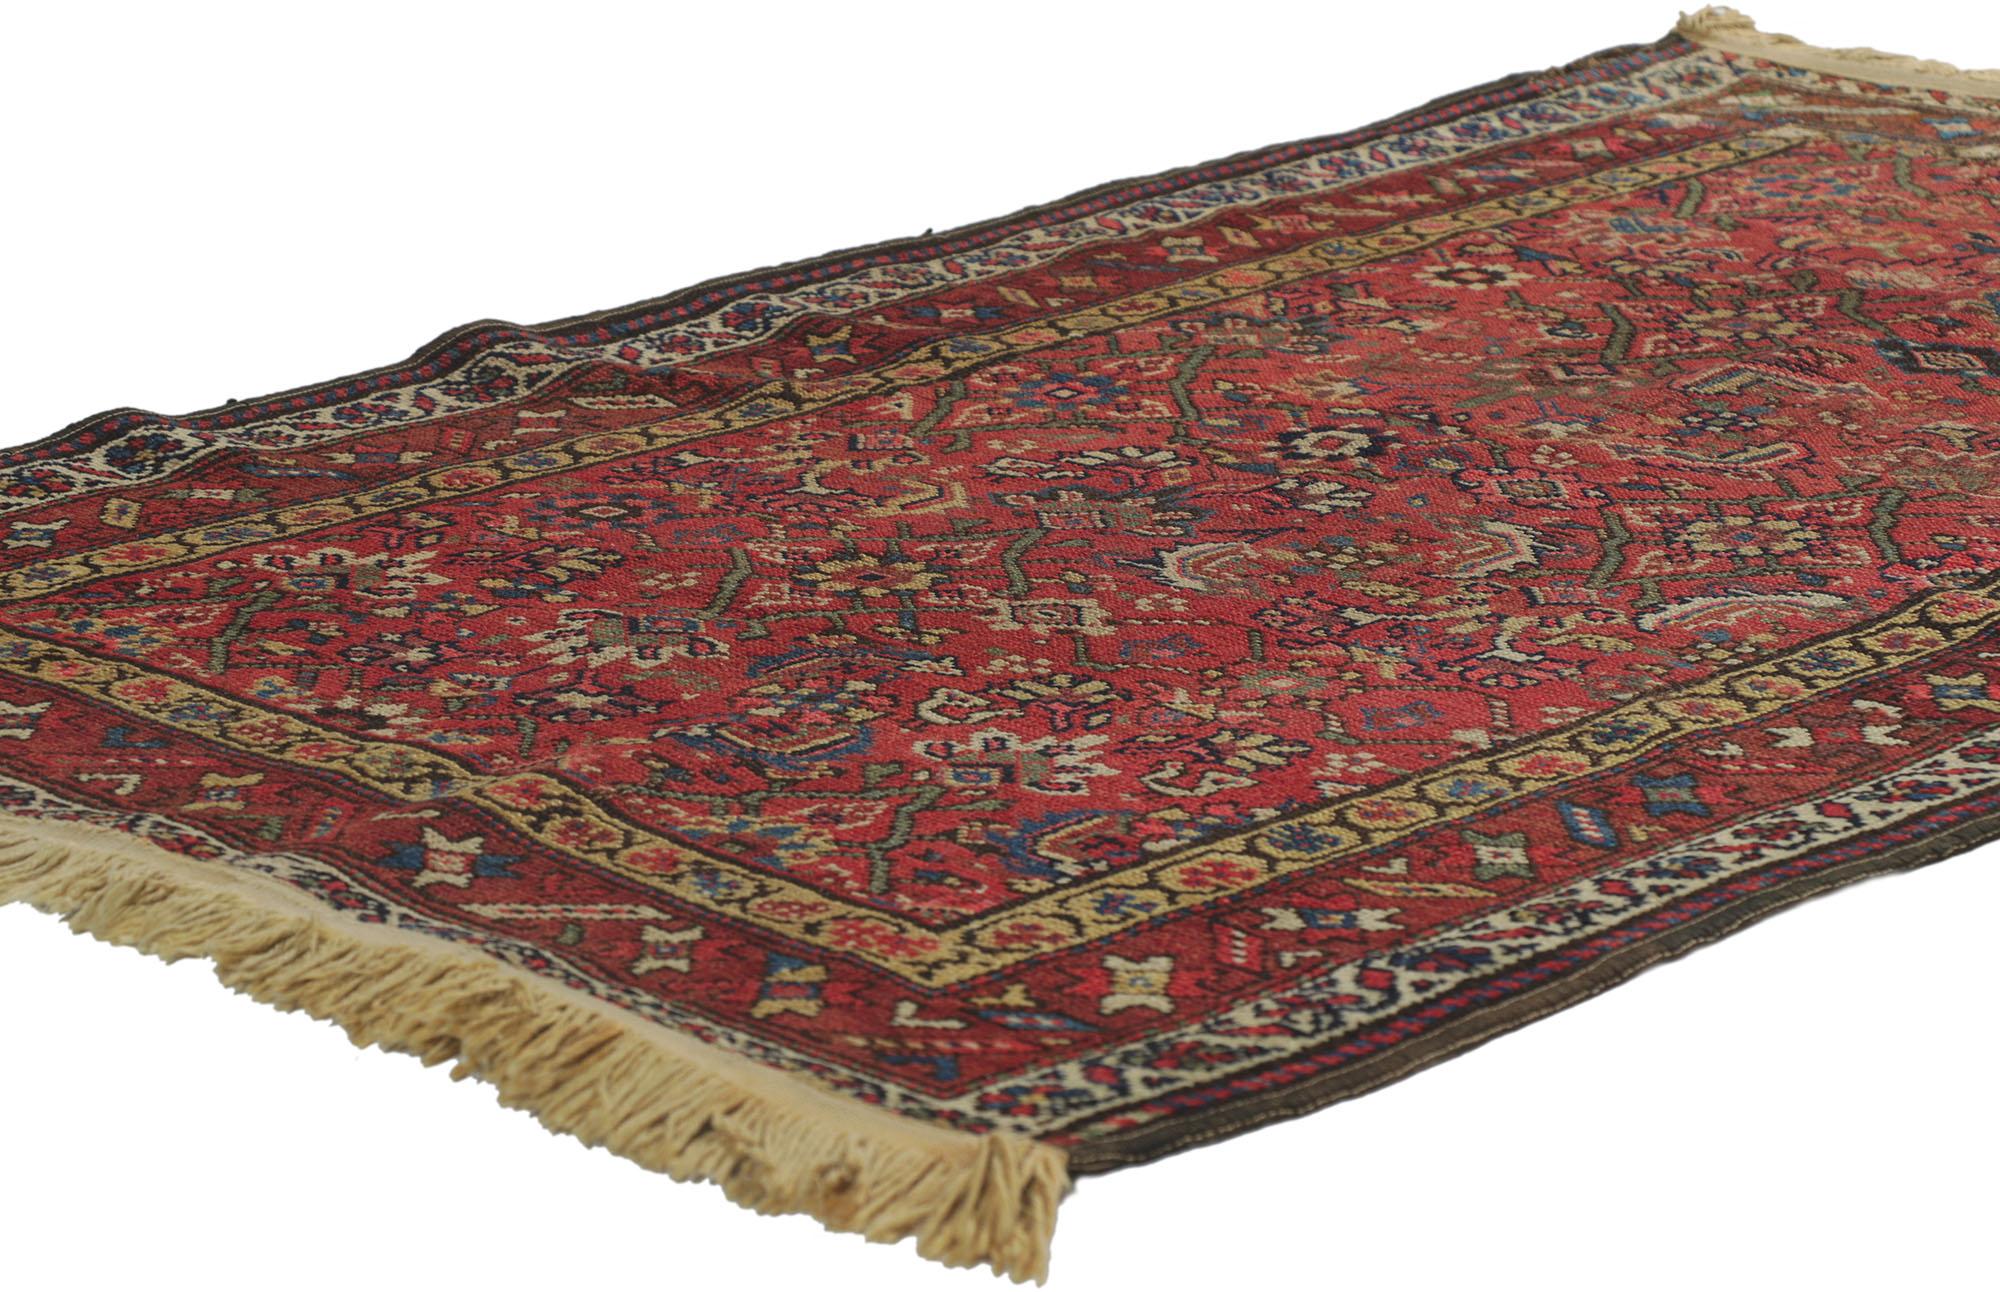 78214 Antique Persian Hamadan rug, 03'01 x 04'08. This hand-knotted wool antique Persian Hamadan rug features an all-over geometric pattern composed of Herati motifs. Desirable Age Wear. Abrash. Hand-knotted wool. Made in Iran.
 